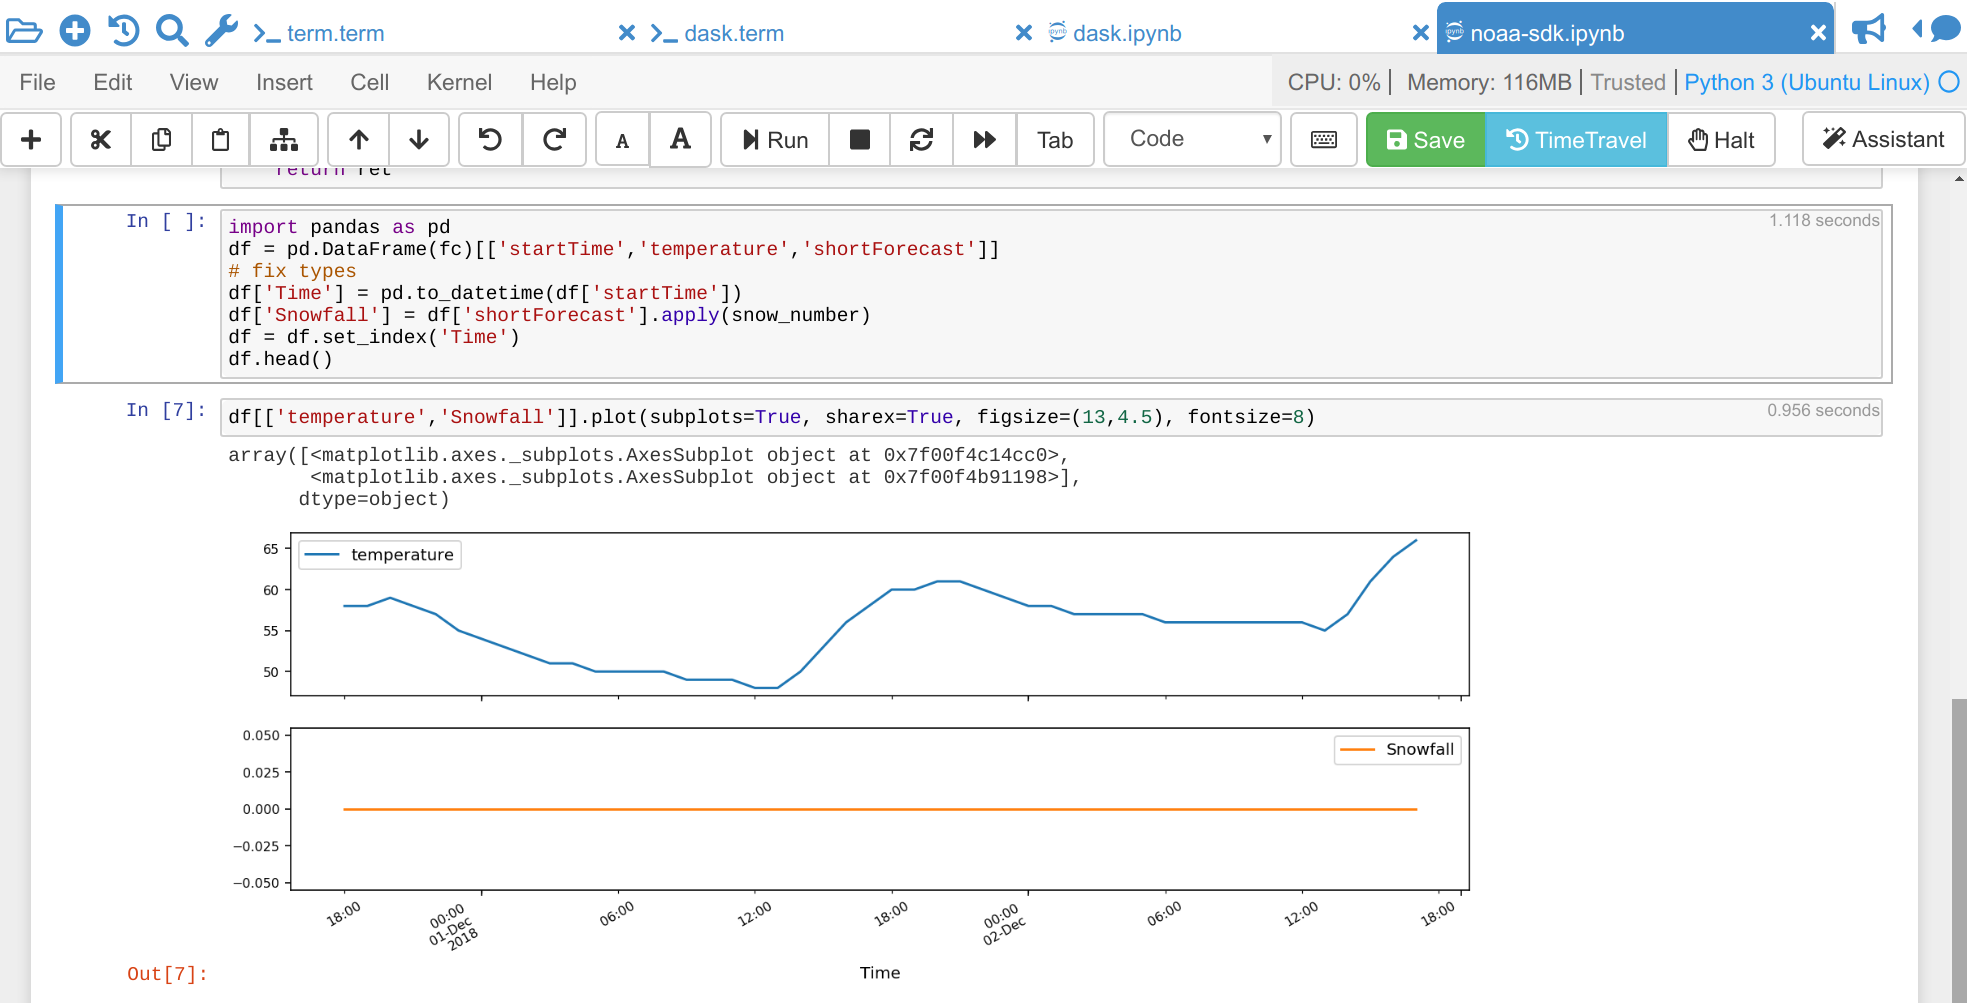 _images/jupyter-notebook-cocalc-1.png